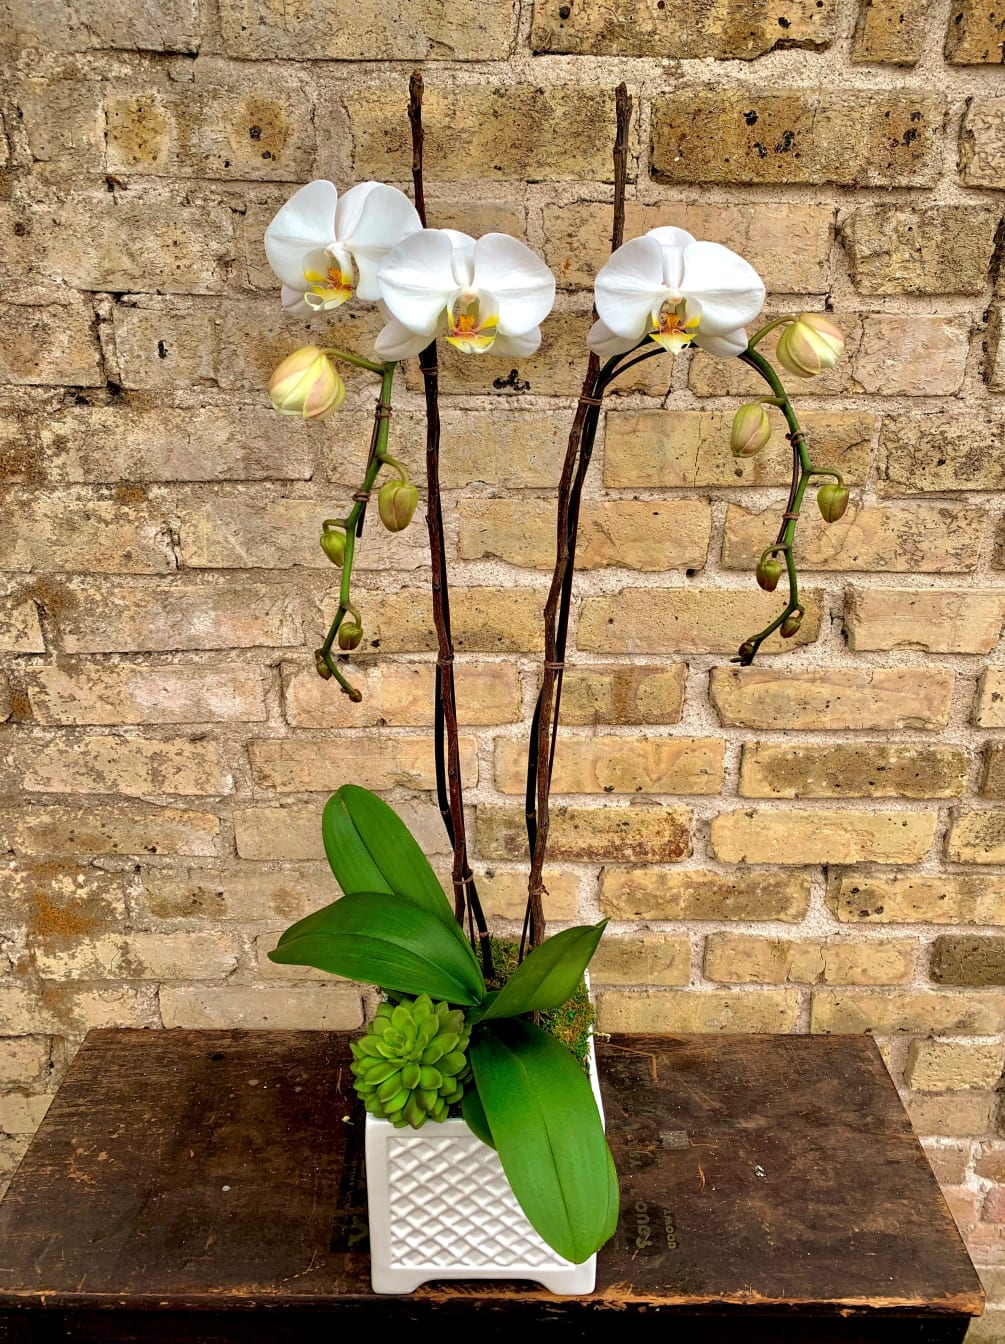 A Beautiful Double White Phalaenopsis Orchid Set 
Into A White Lattice Style